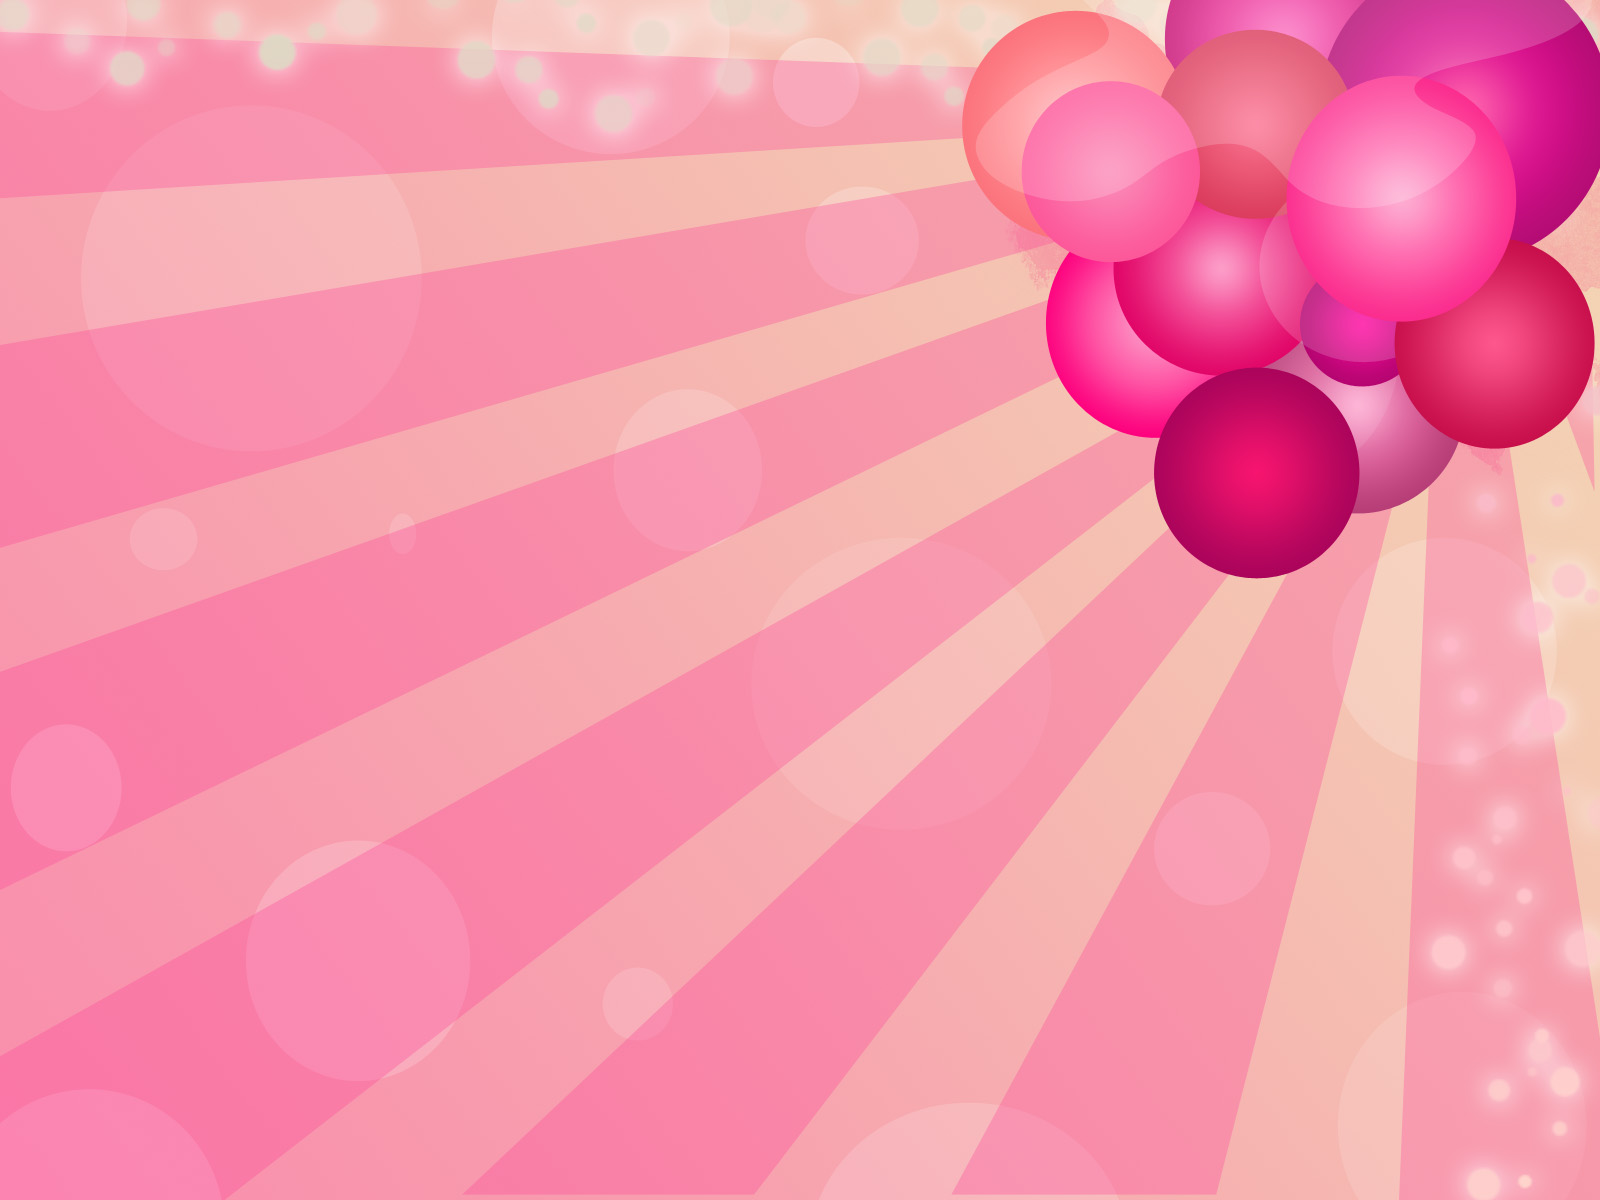 Wallpapers Pink Backgrounds Top Collections of Pictures Images